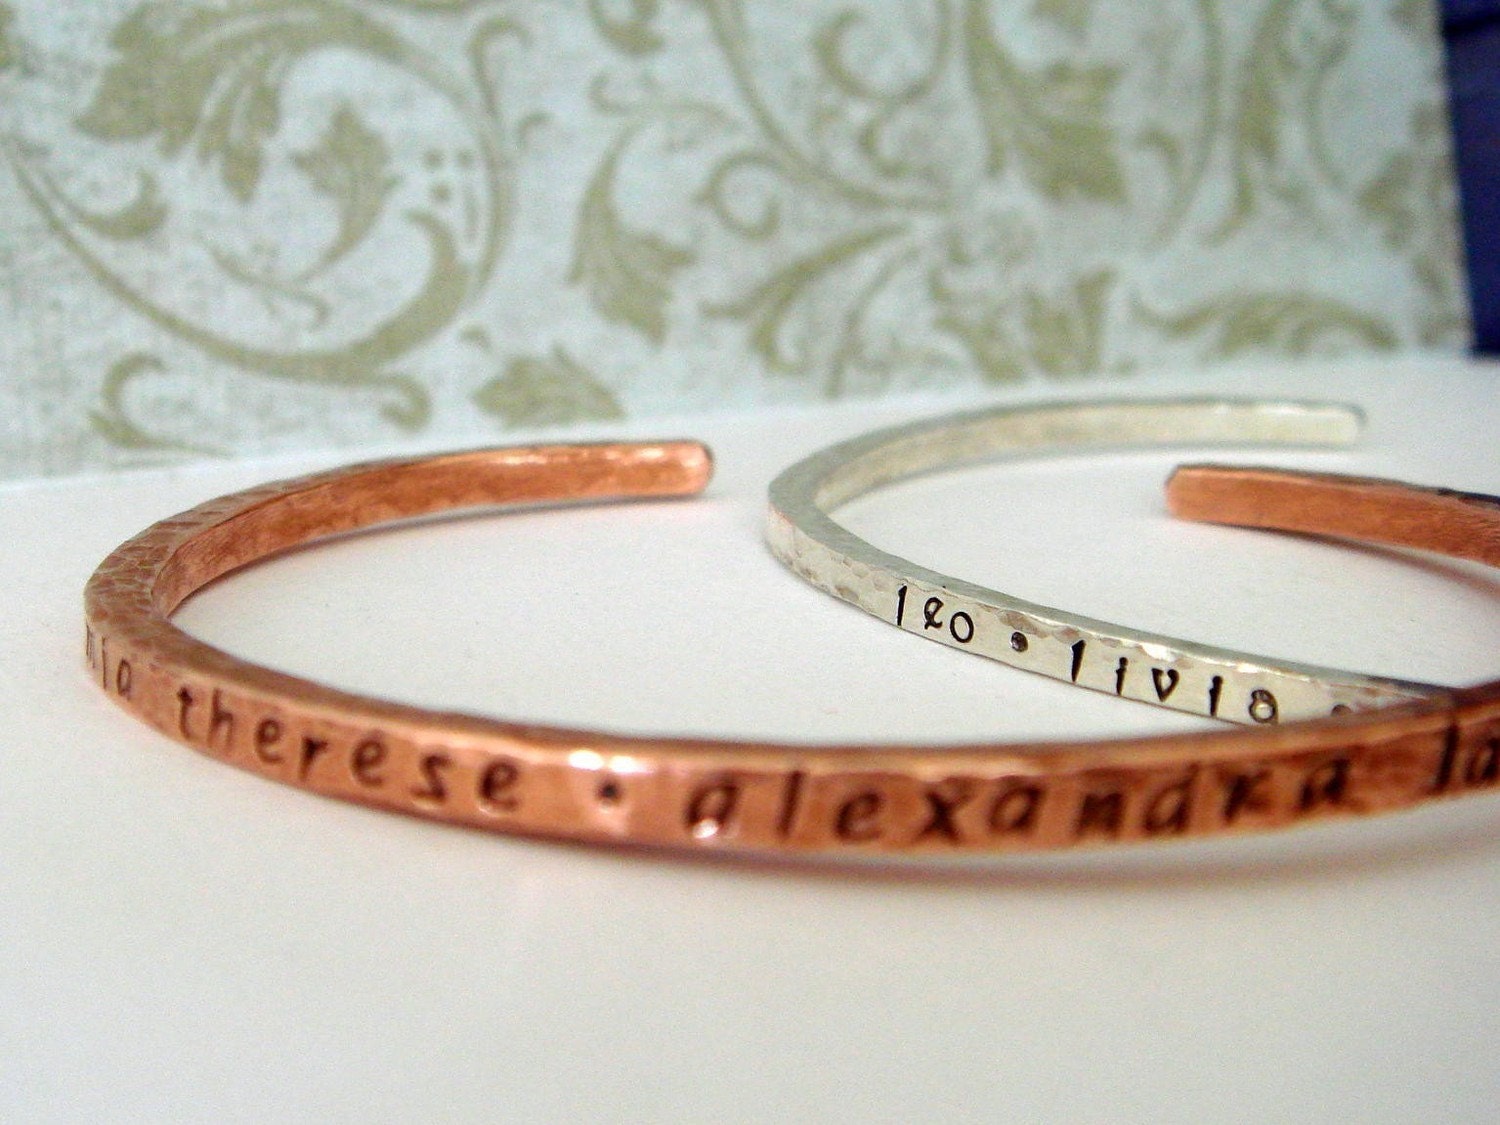 Small or Medium copper cuff - personalized for friend, teacher, love, bridesmaid, BFF or guy- could be twilight or new moon inspired. Can have inside secret message. 2 lowercase font choices.  Hammered or smooth finish.